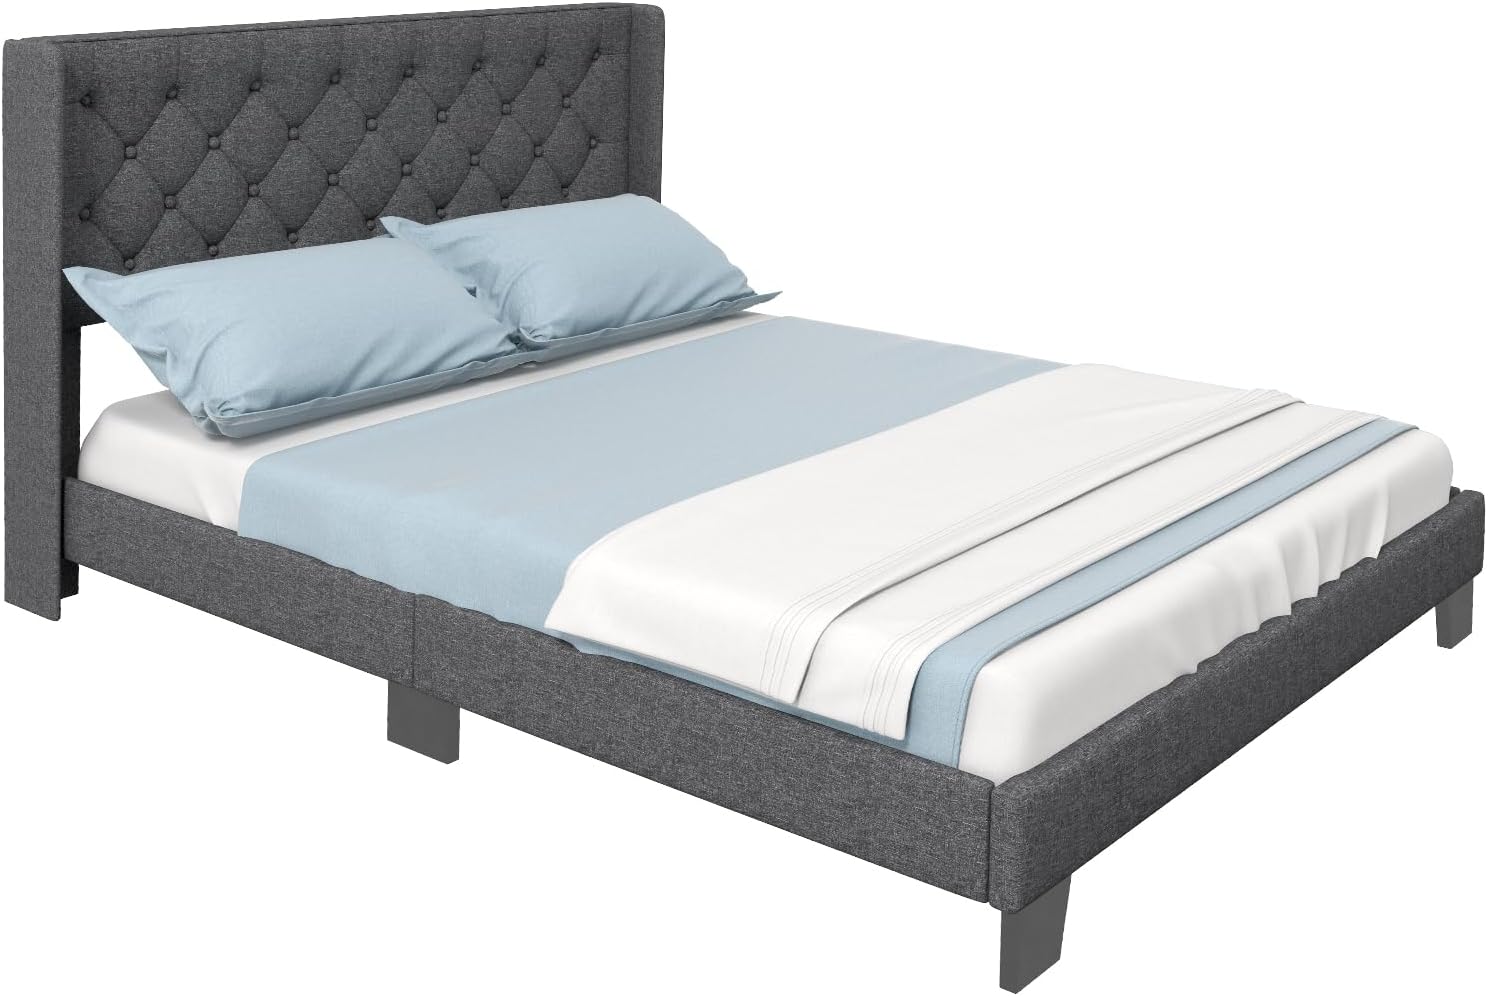 Giantex Bed Frame with Button Tufted Headboard, Modern Fabric Upholstered Platform Bed with Wingback Design, Grey